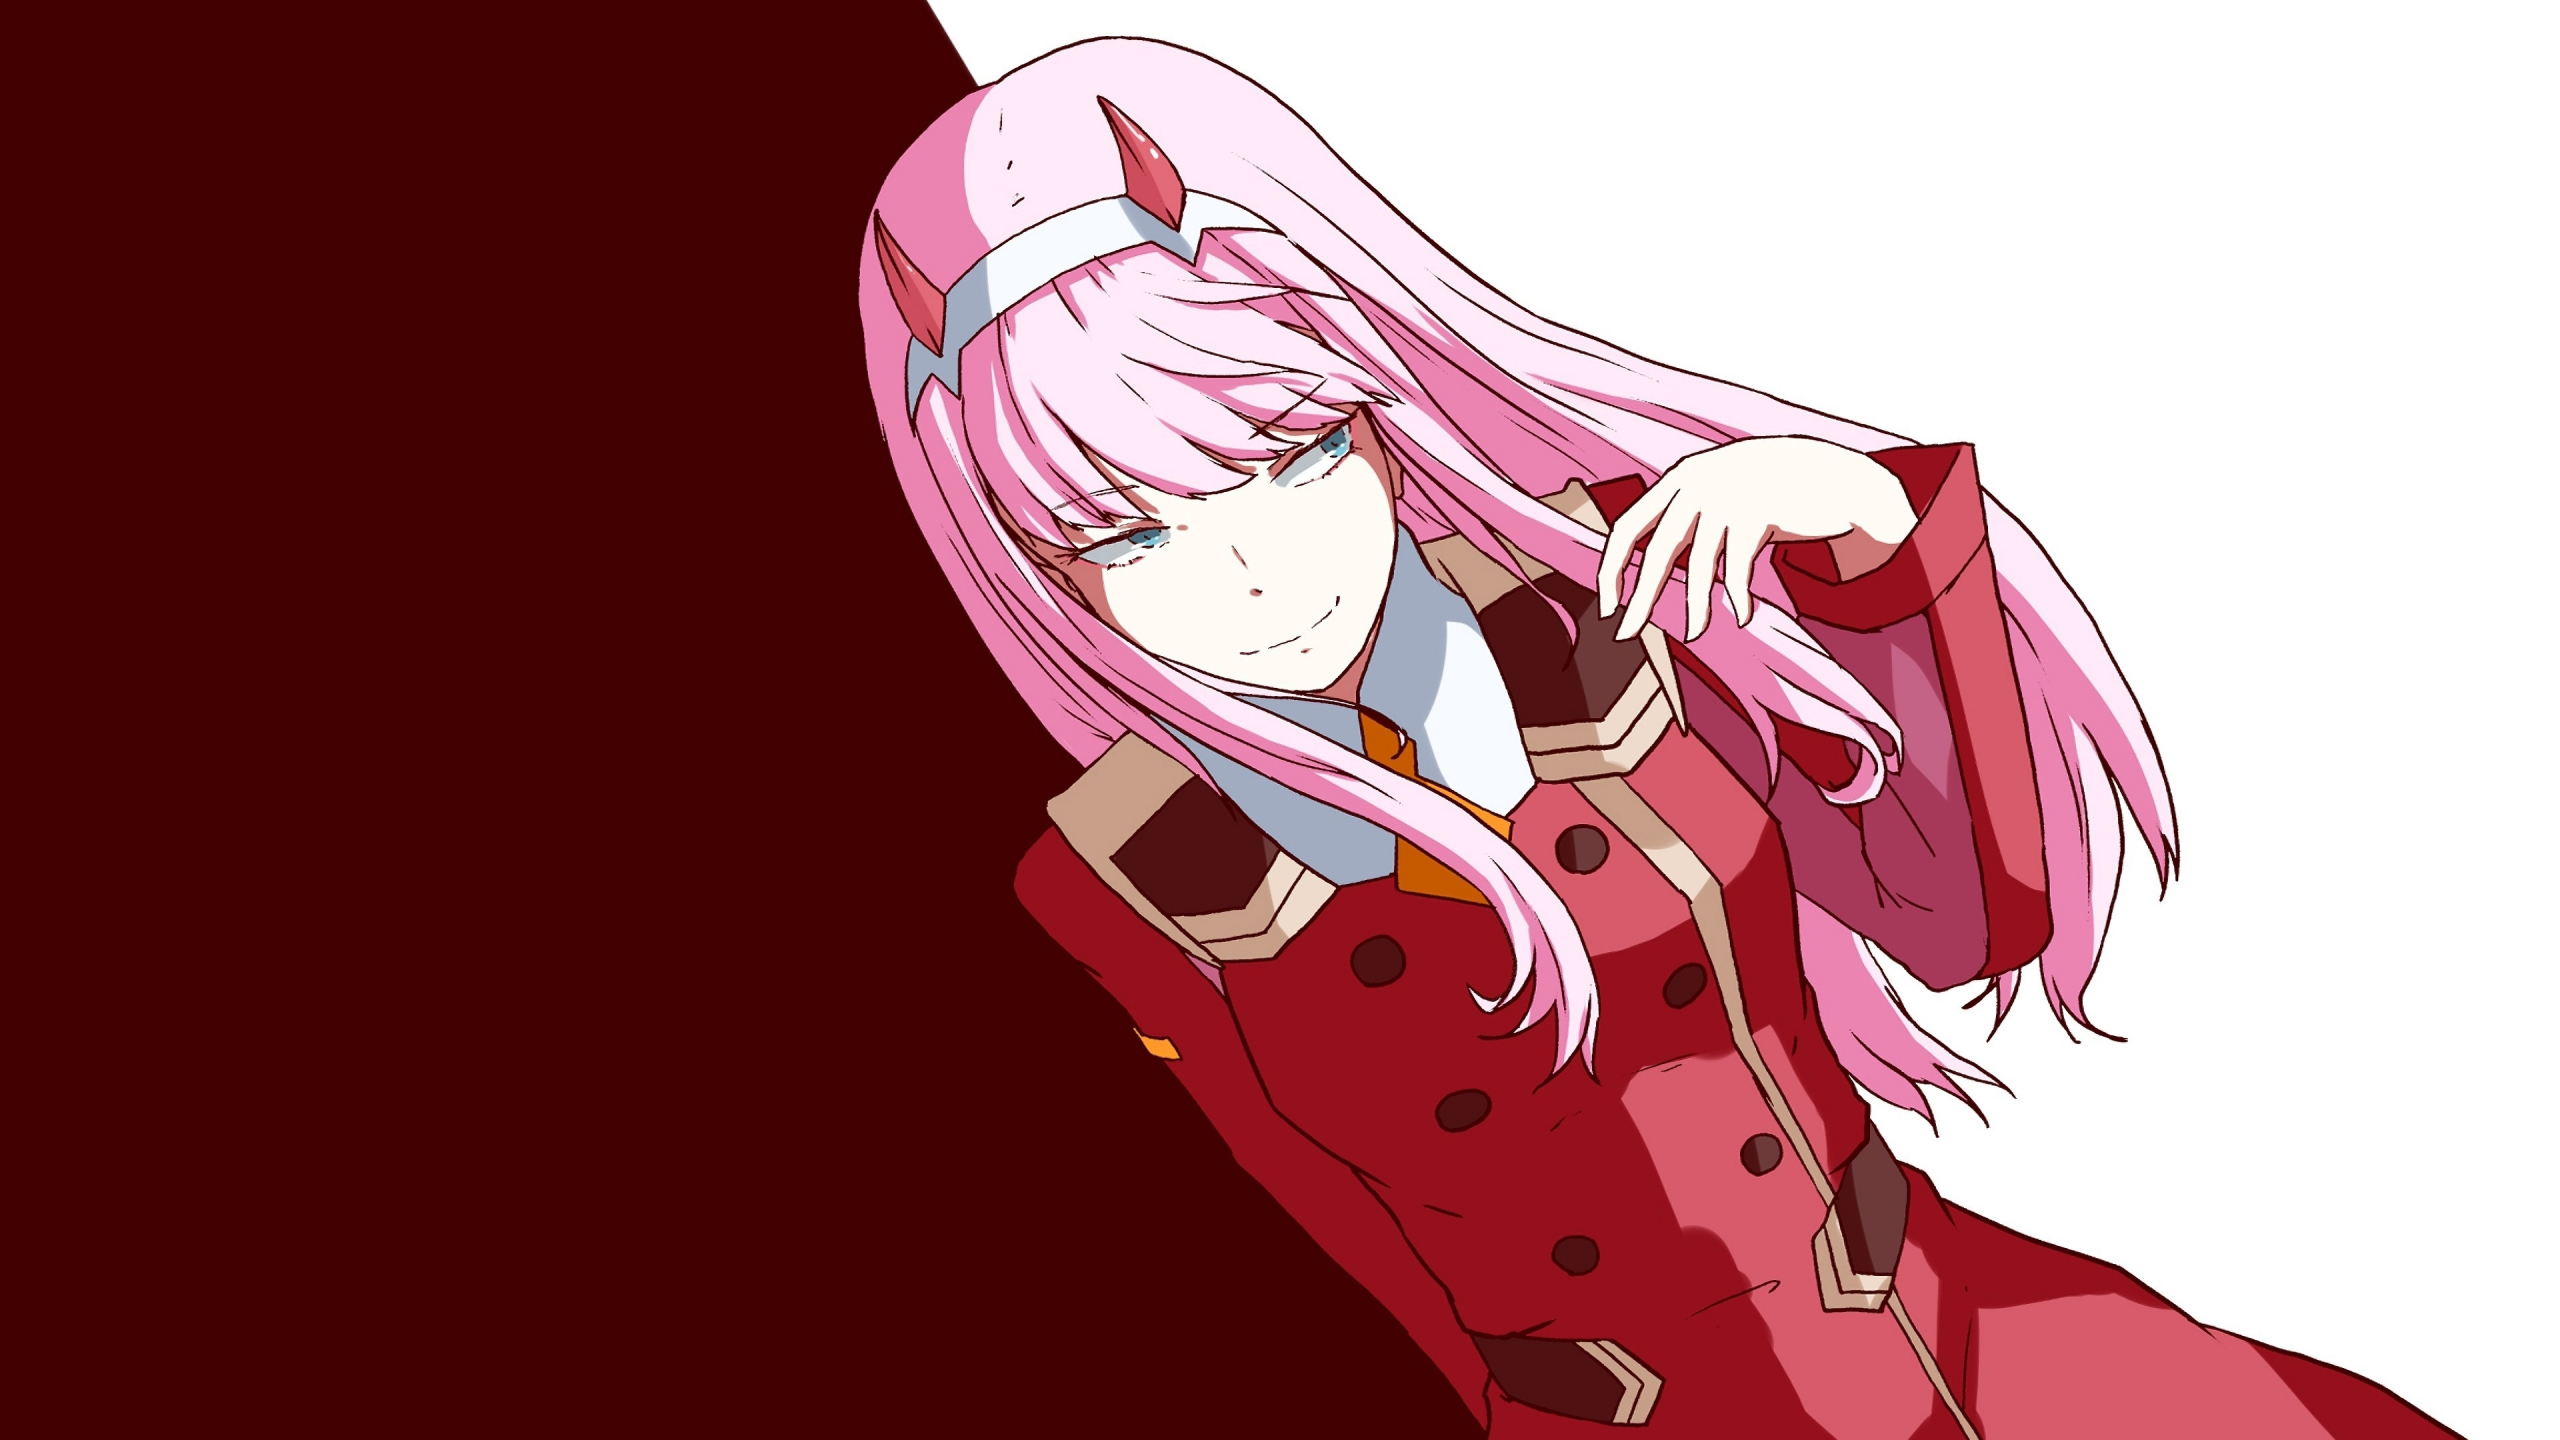 4. Zero Two from Darling in the Franxx - wide 8